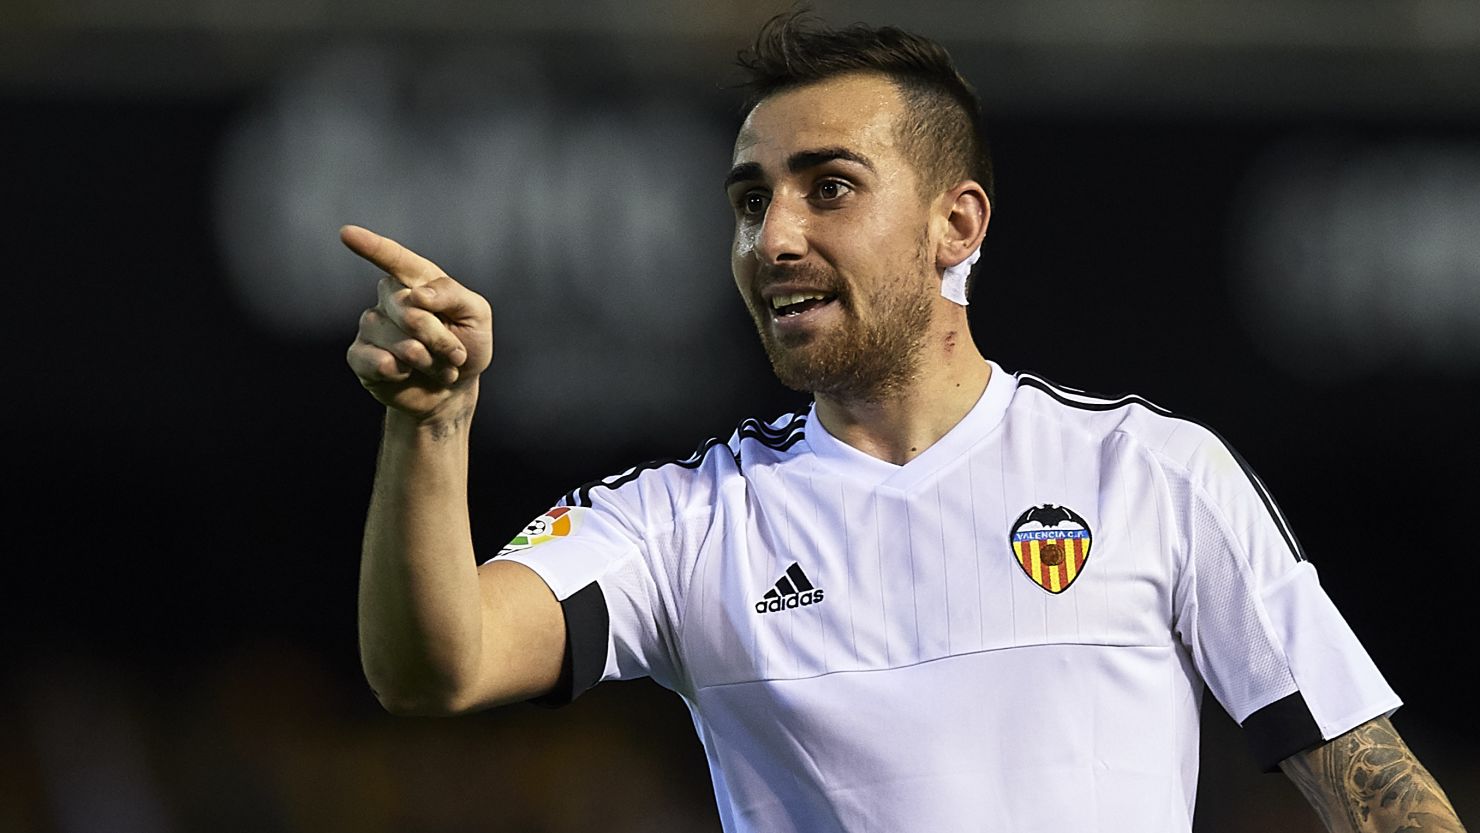 Paco Alcacer of Valencia celebrates his side's late equalizer in the 2-2 draw with Real Madrid in the Mestella.
